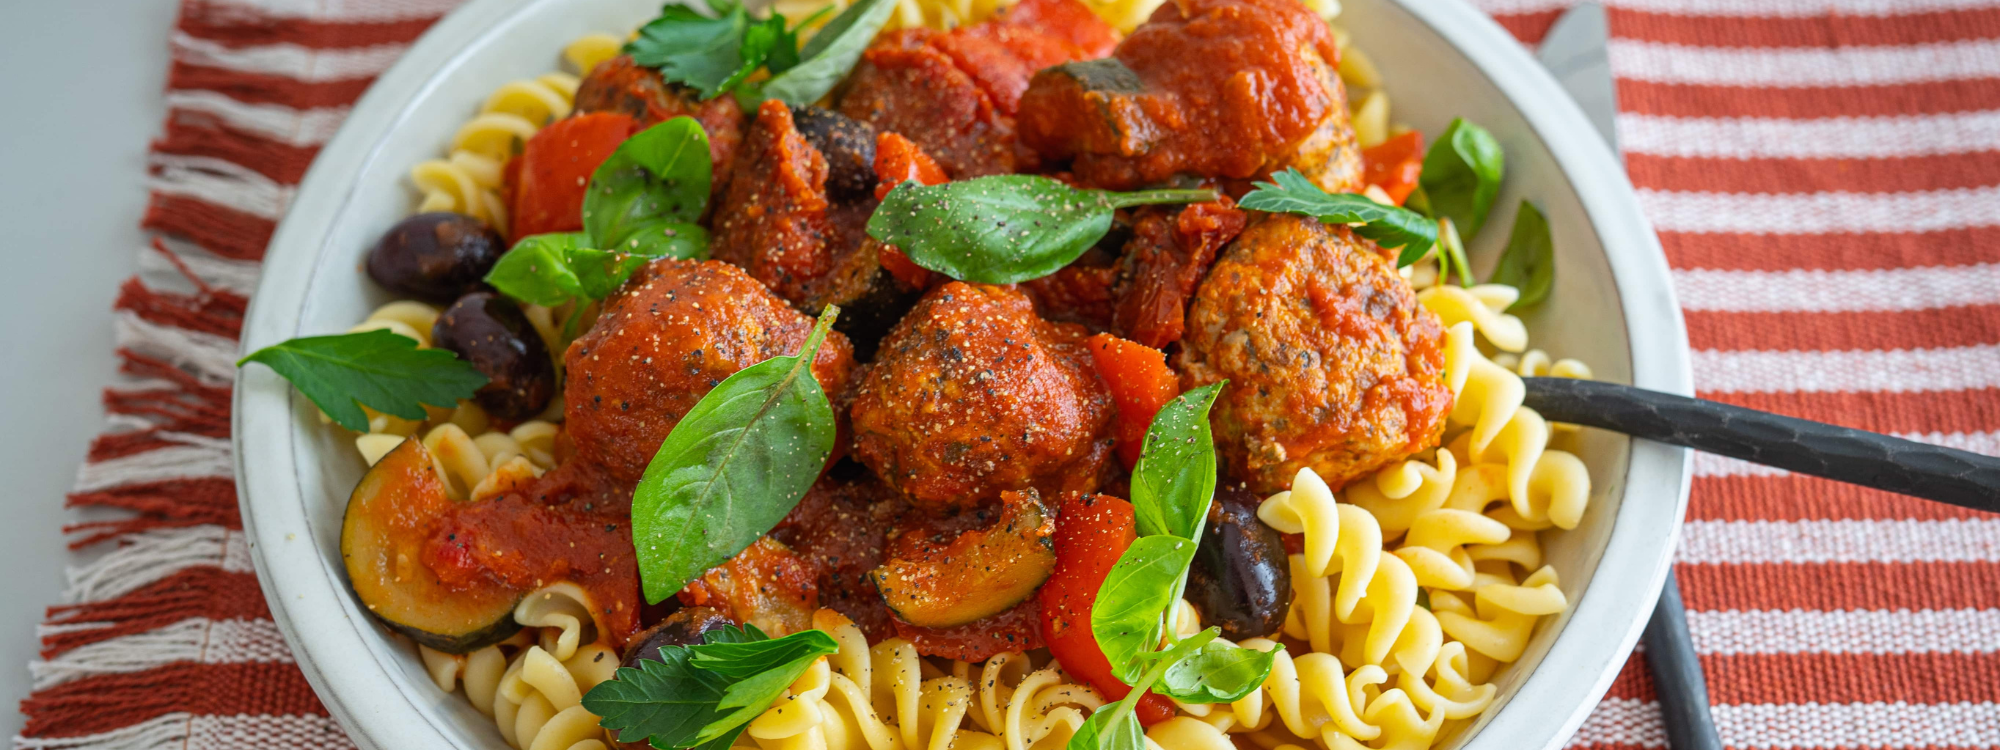 Chicken_Mushroom_Blended_Cacciatore_Meatballs_with_Pasta_summeredition (1)